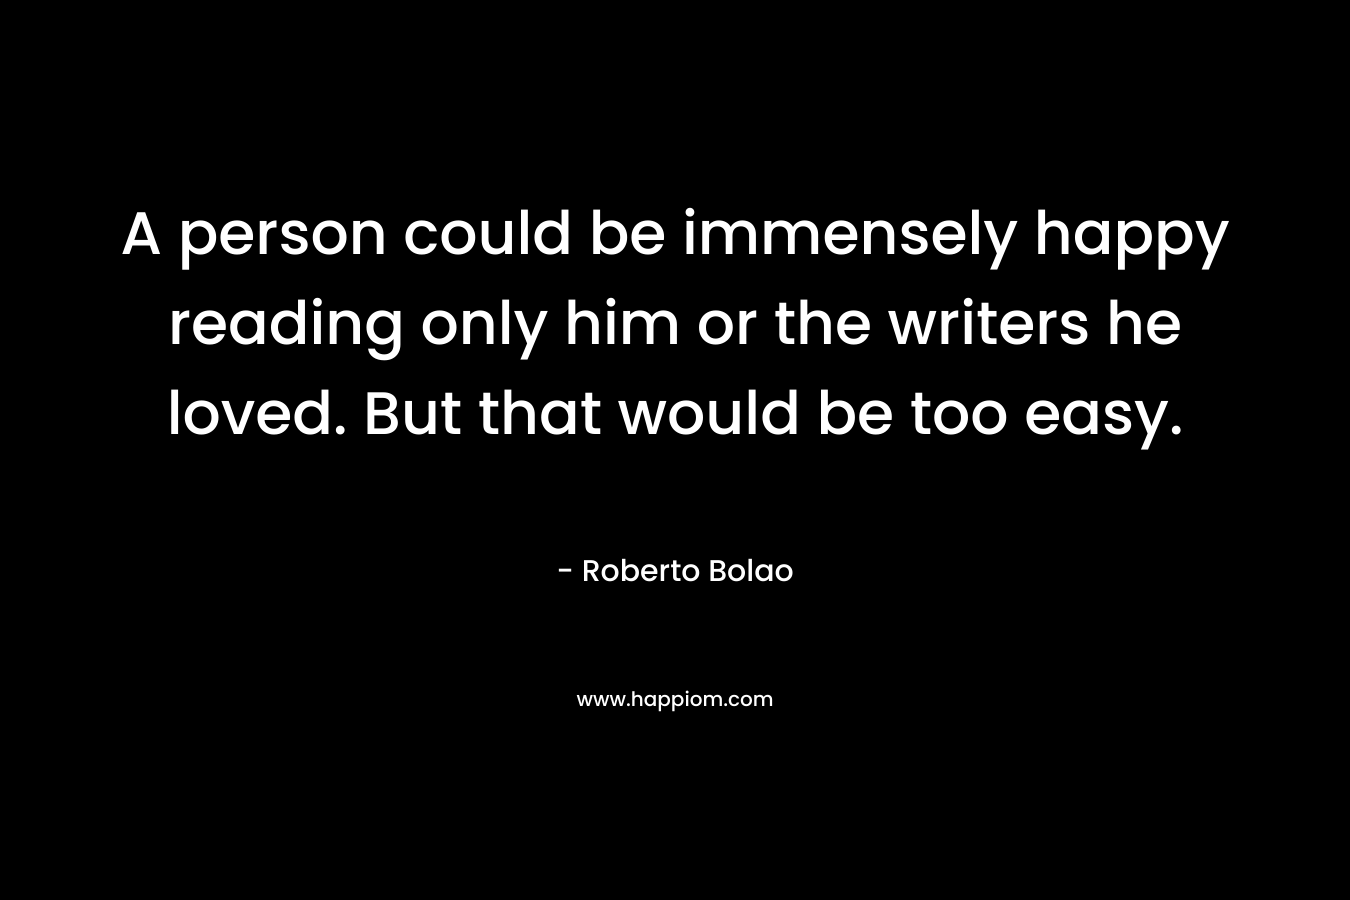 A person could be immensely happy reading only him or the writers he loved. But that would be too easy.